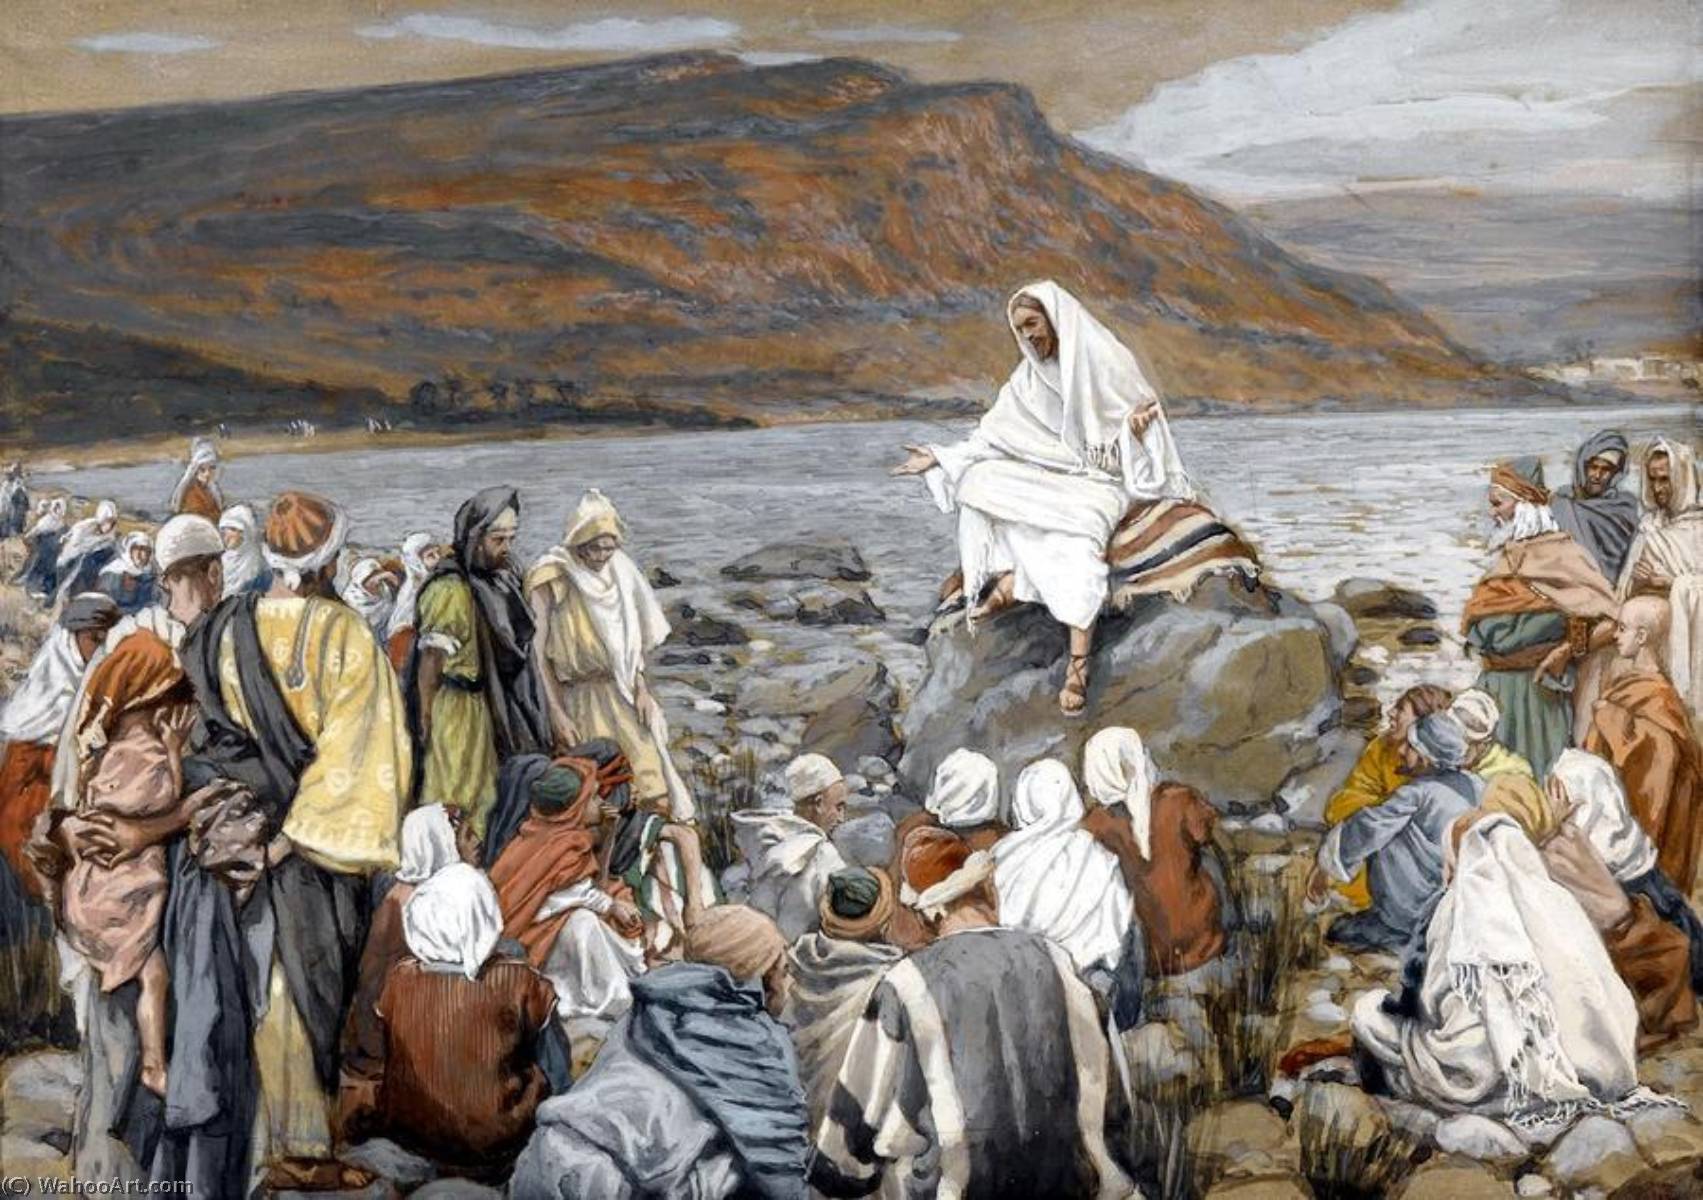 Order Paintings Reproductions Jesus Teaches the People by the Sea, 1896 by James Jacques Joseph Tissot (1836-1902, France) | ArtsDot.com